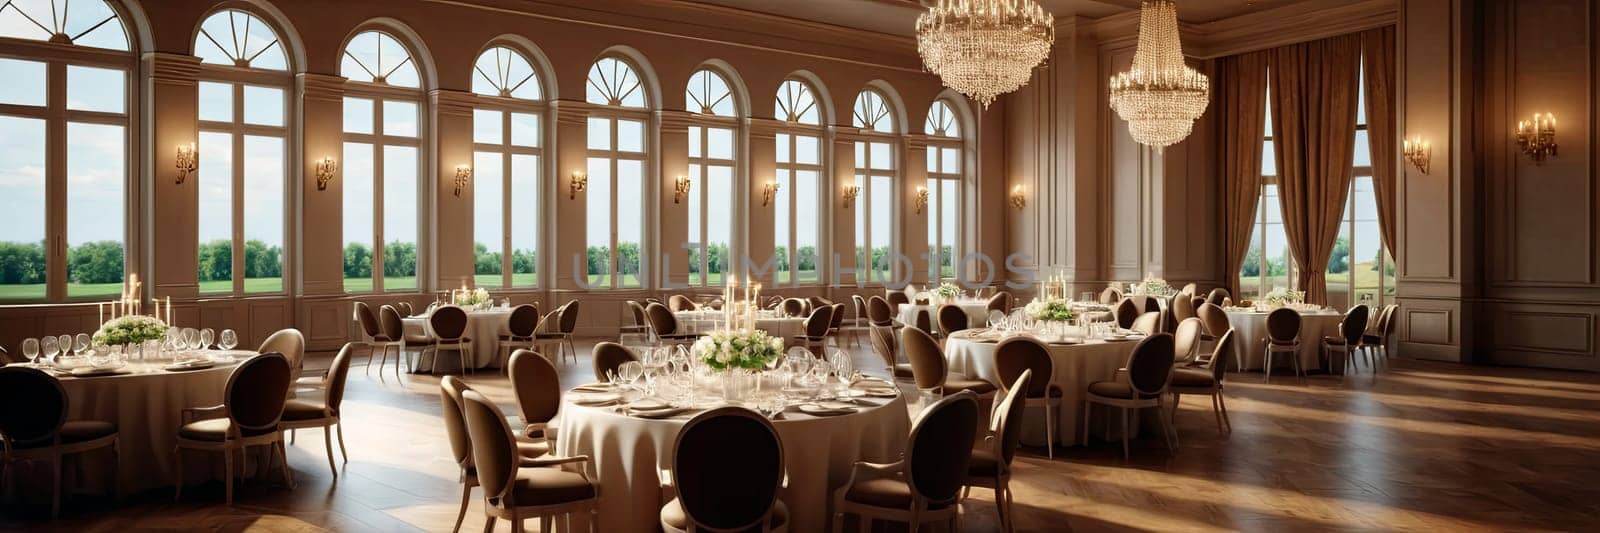 Elegant banquet hall, round tables adorned with flowers are illuminated by the soft glow of a chandelier and natural light from arched windows during an evening event. by Matiunina